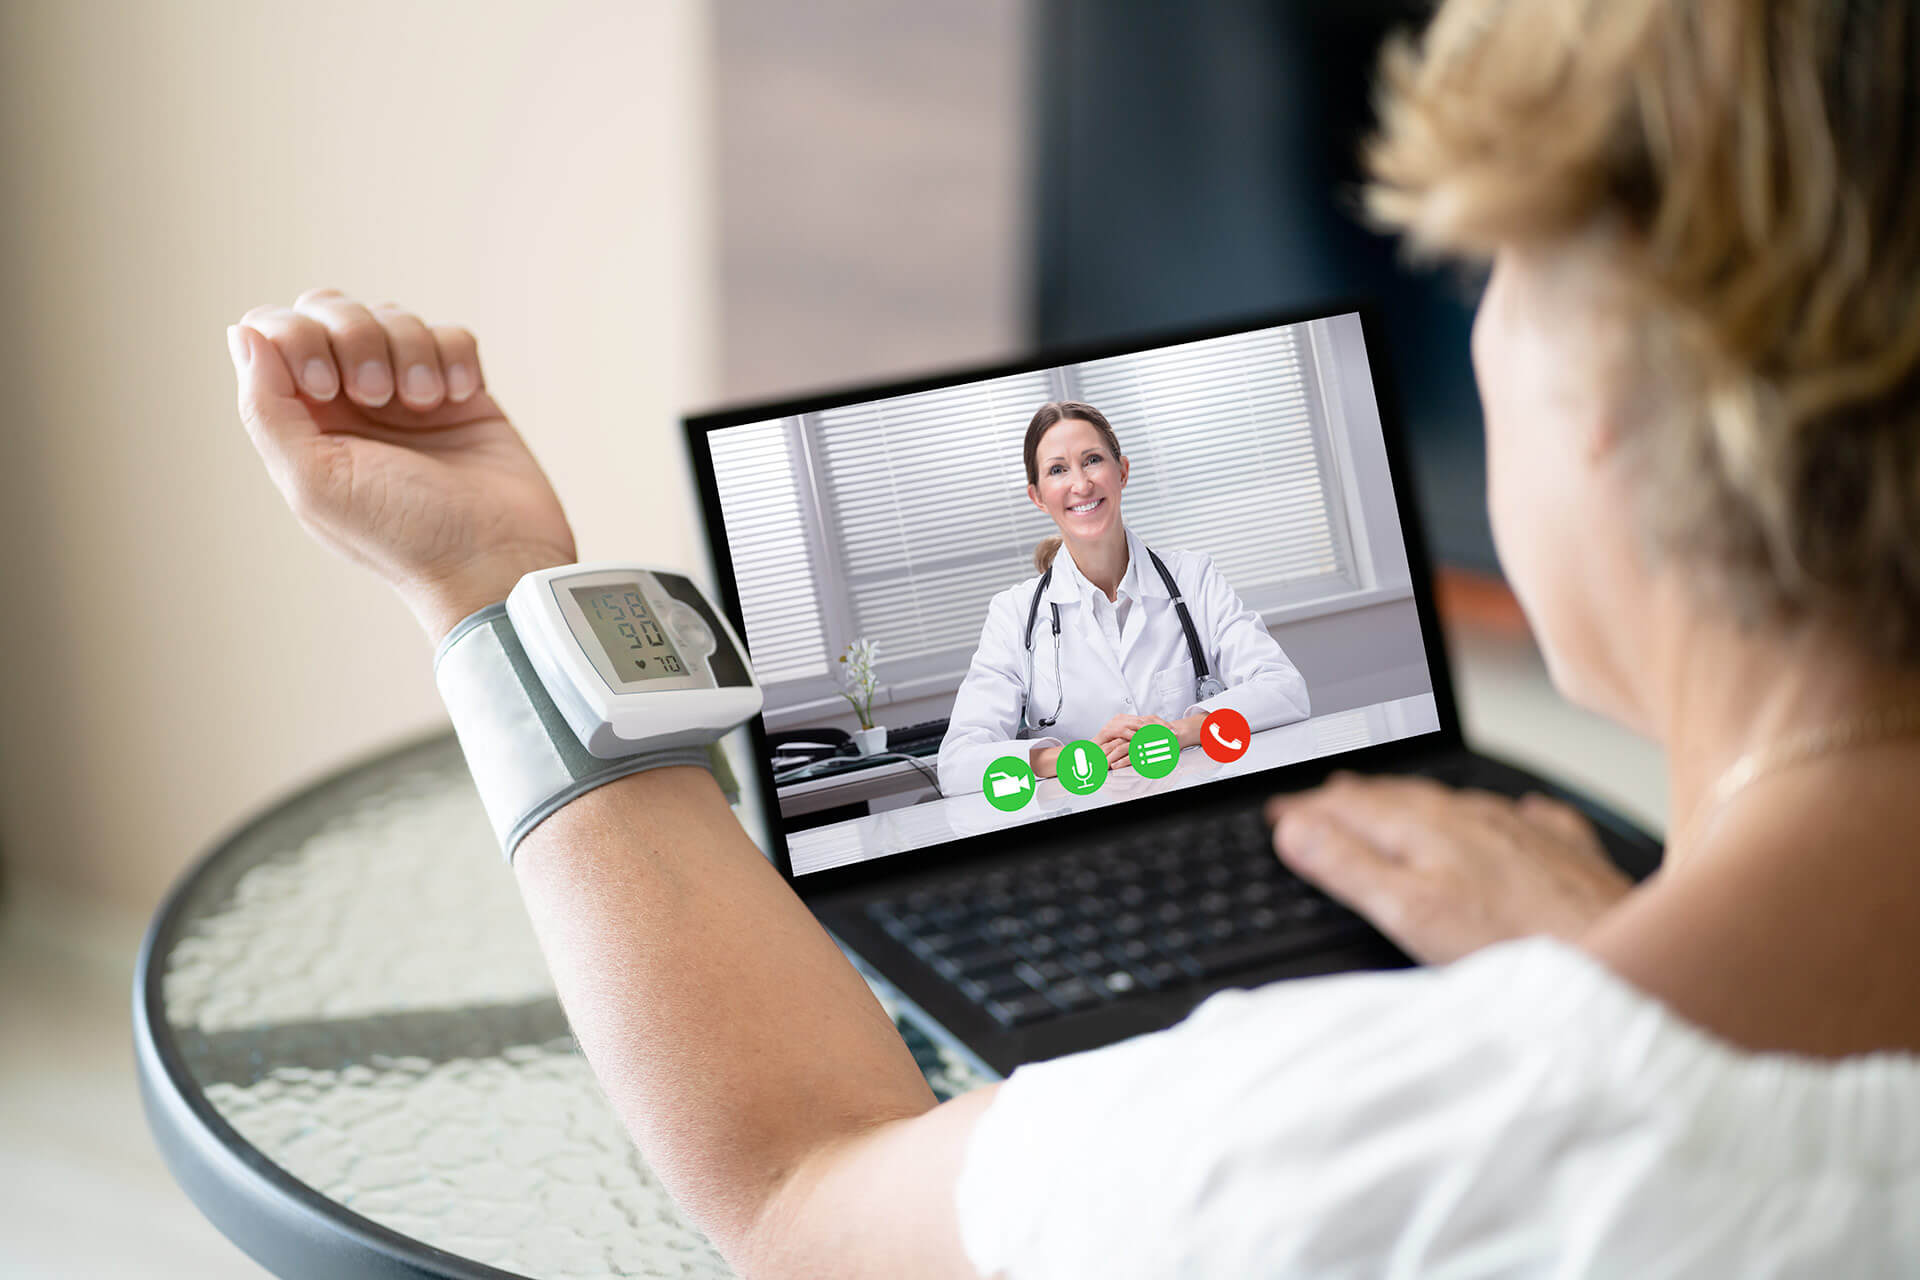 Technology and health go hand in hand at levels like we have never known in history. Telemedicine, telemonitoring and wearable devices